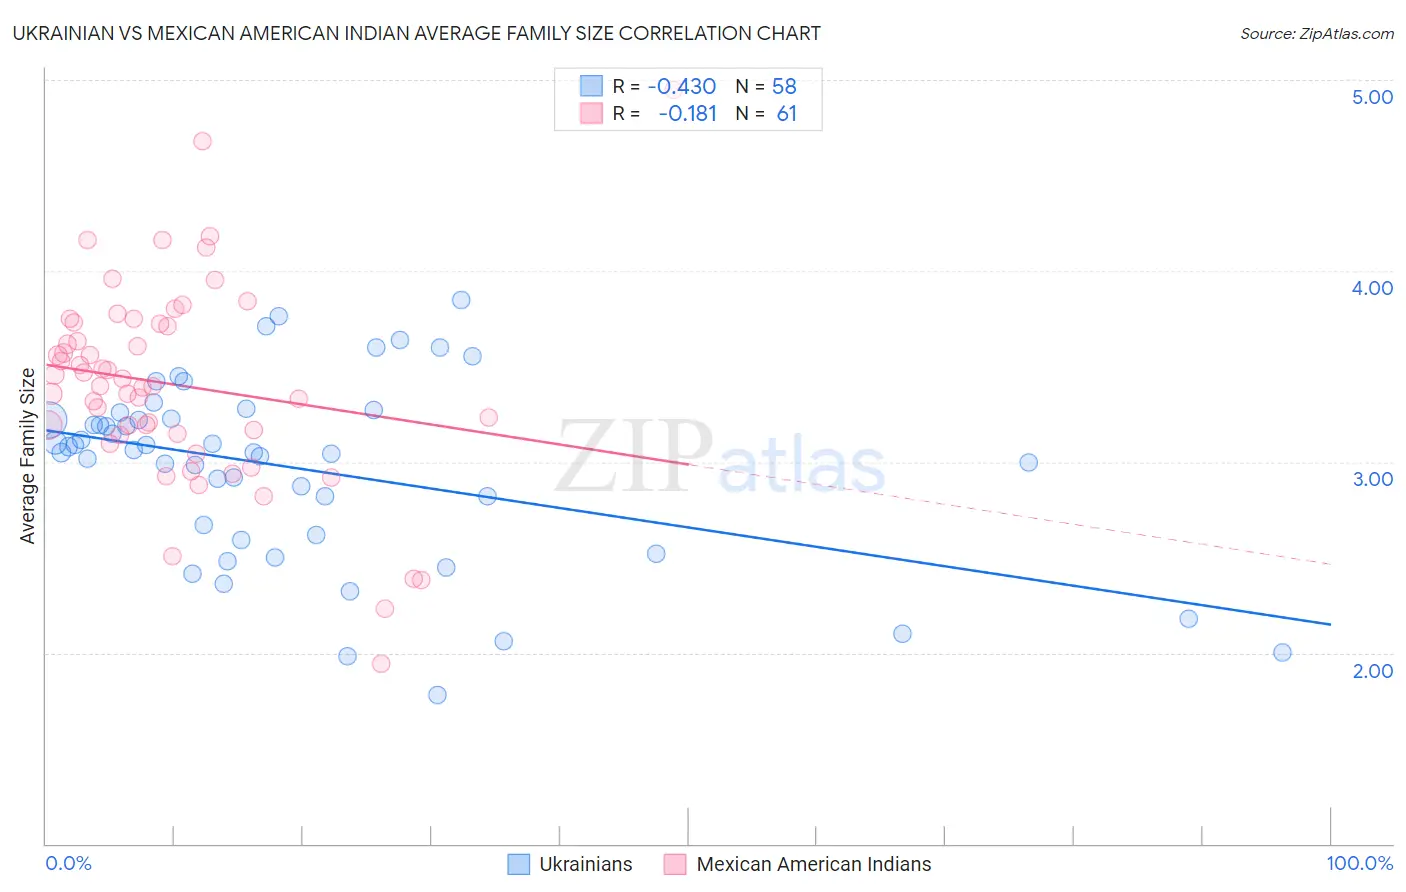 Ukrainian vs Mexican American Indian Average Family Size